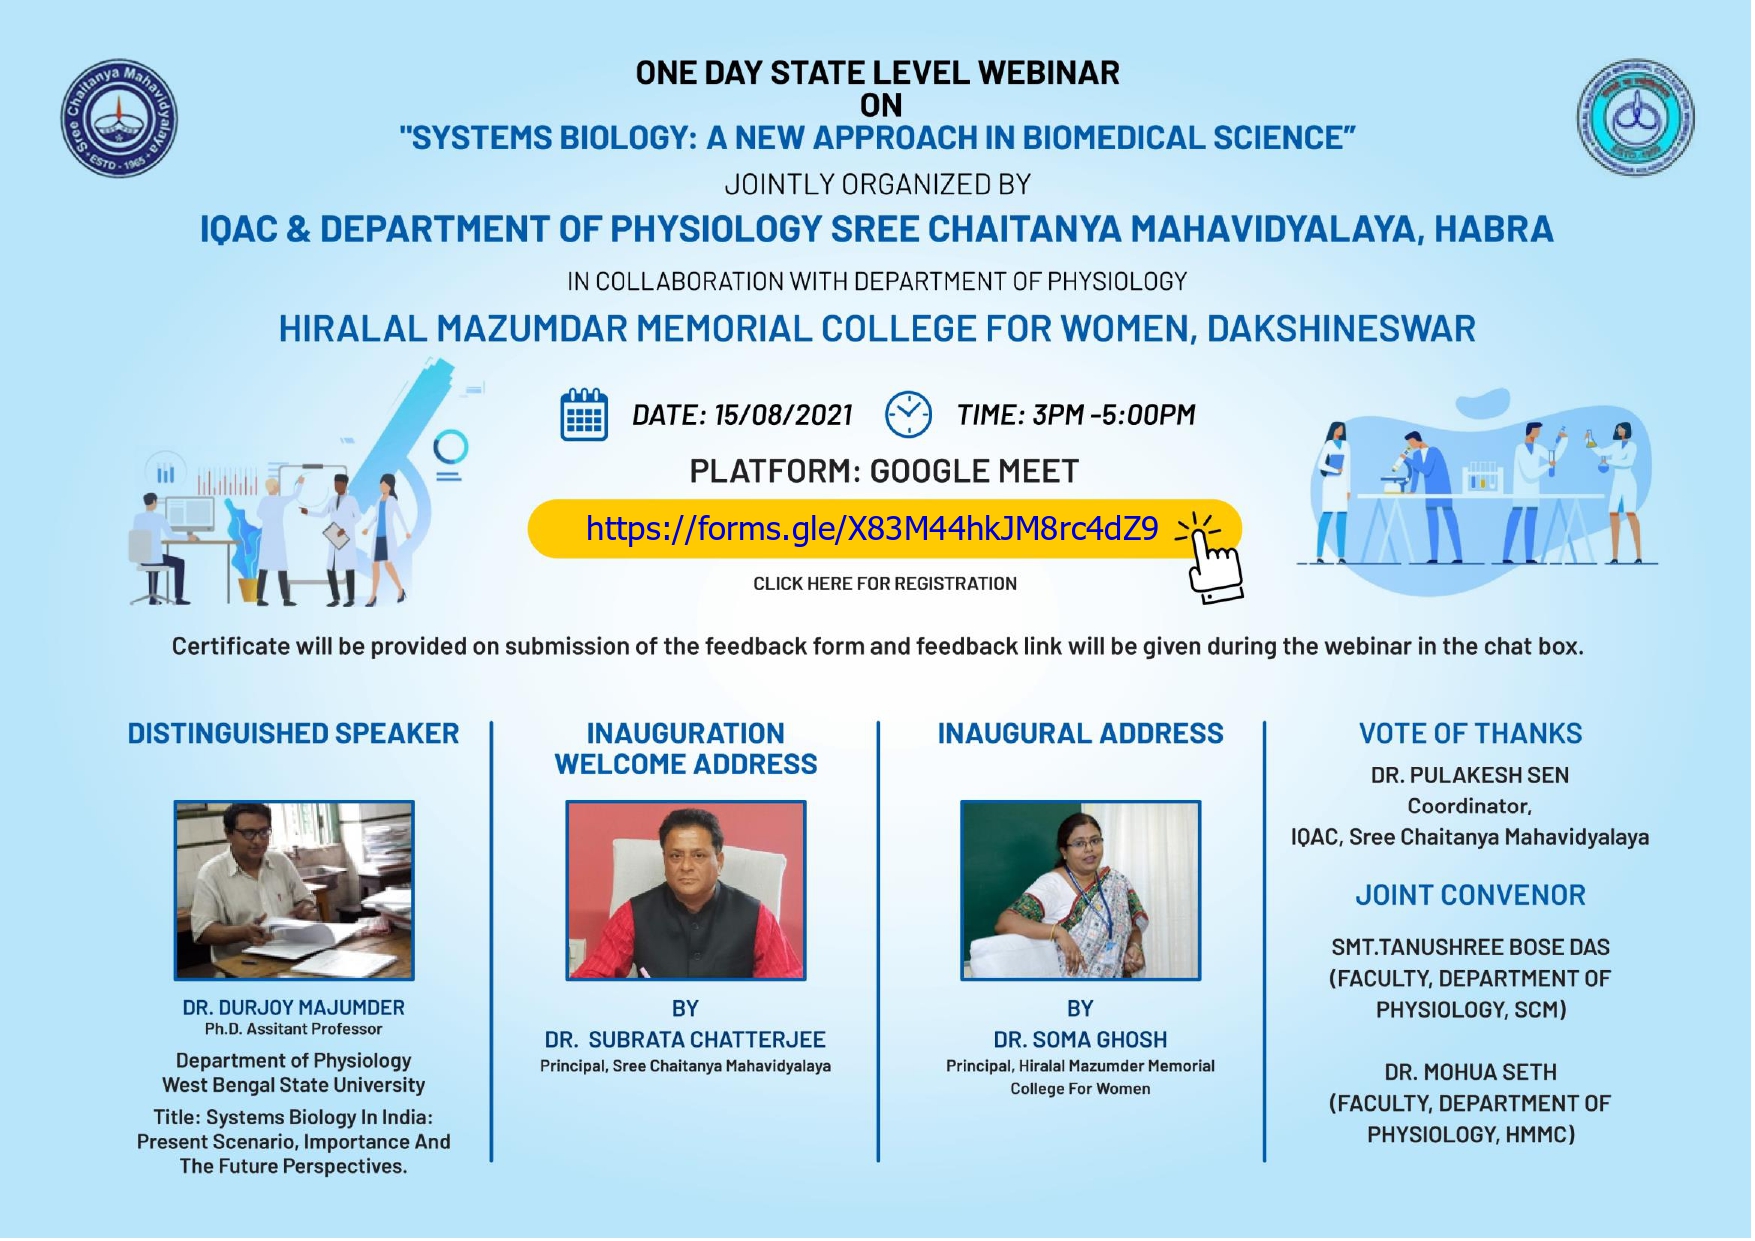 State Level Webinar on A new Approach in Biomedical Science, 15-08-2021